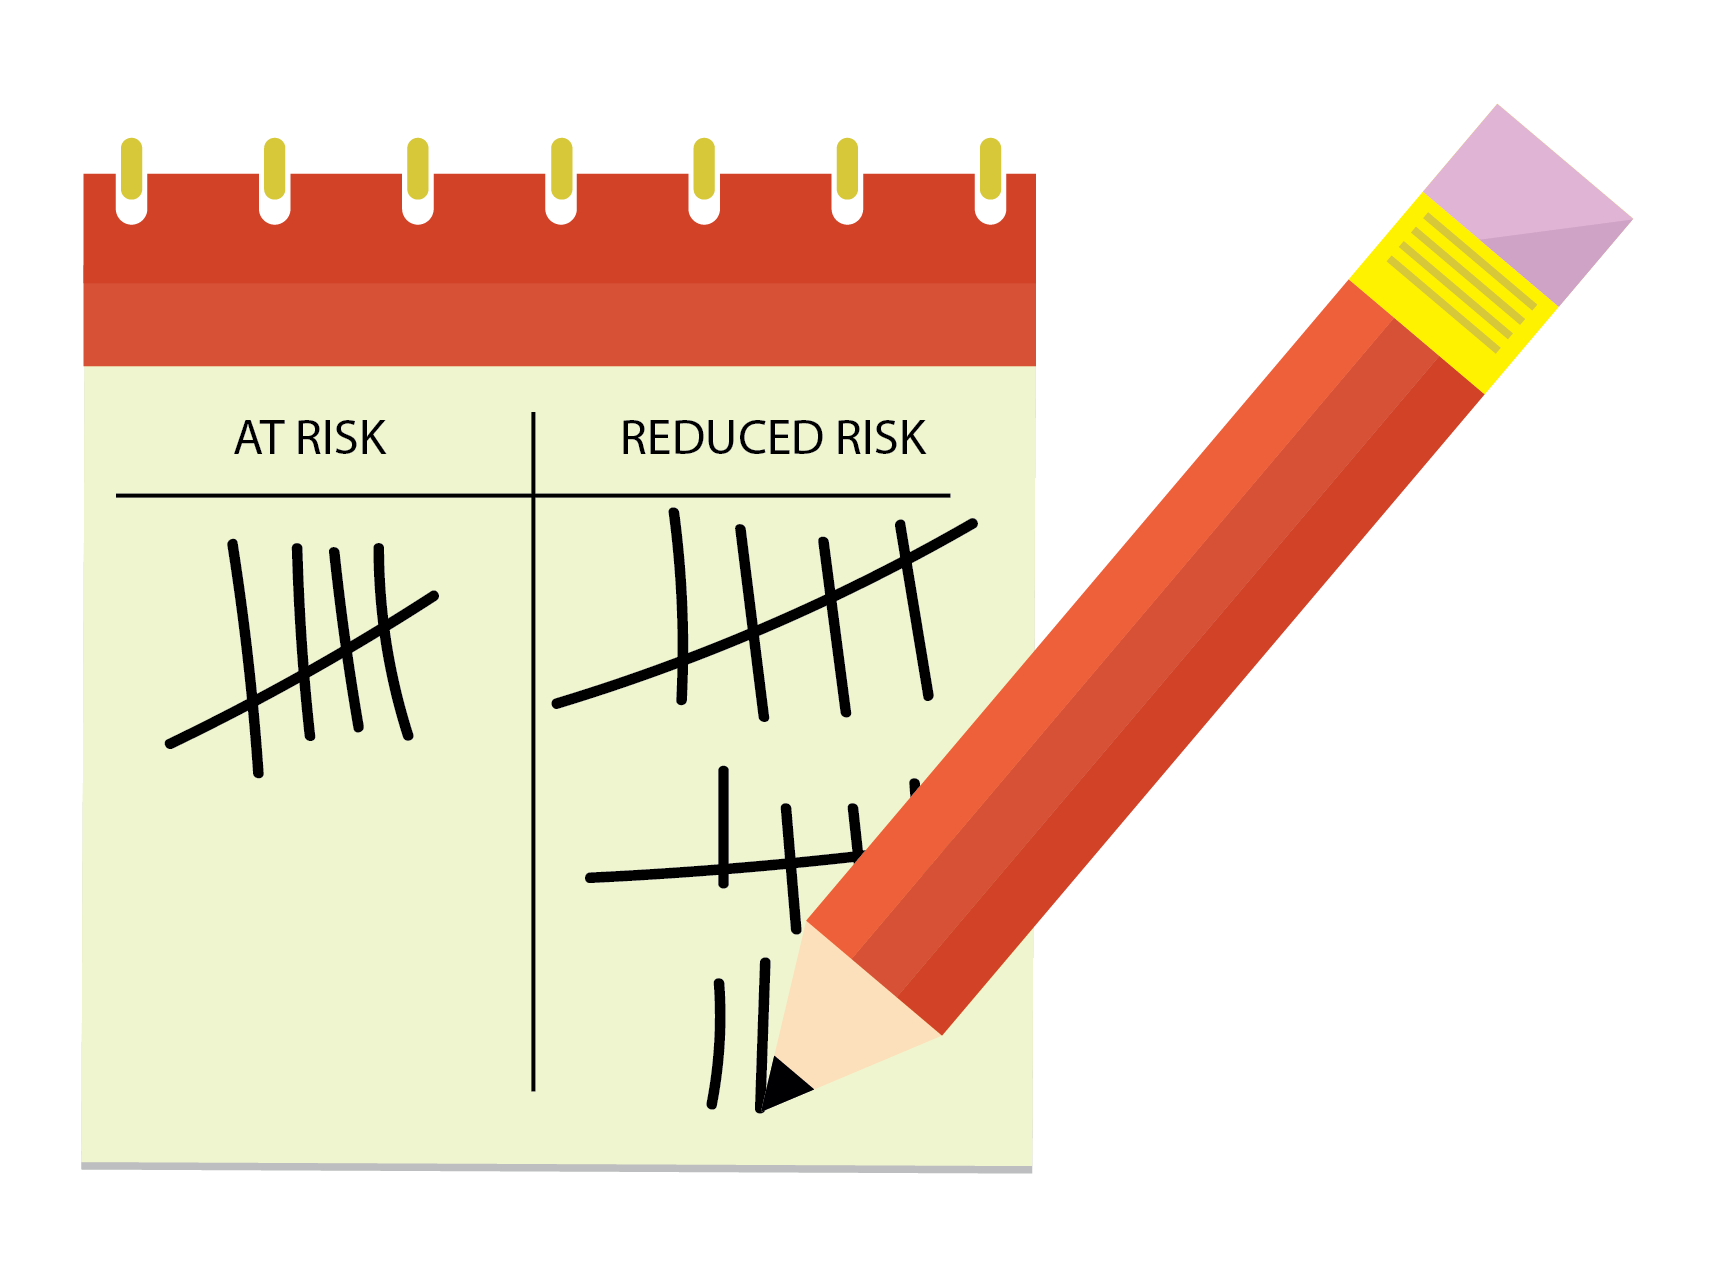 Measuring at risk and reduced risk behaviours. Behavioural Insights programmes and tools for safety by Sodak